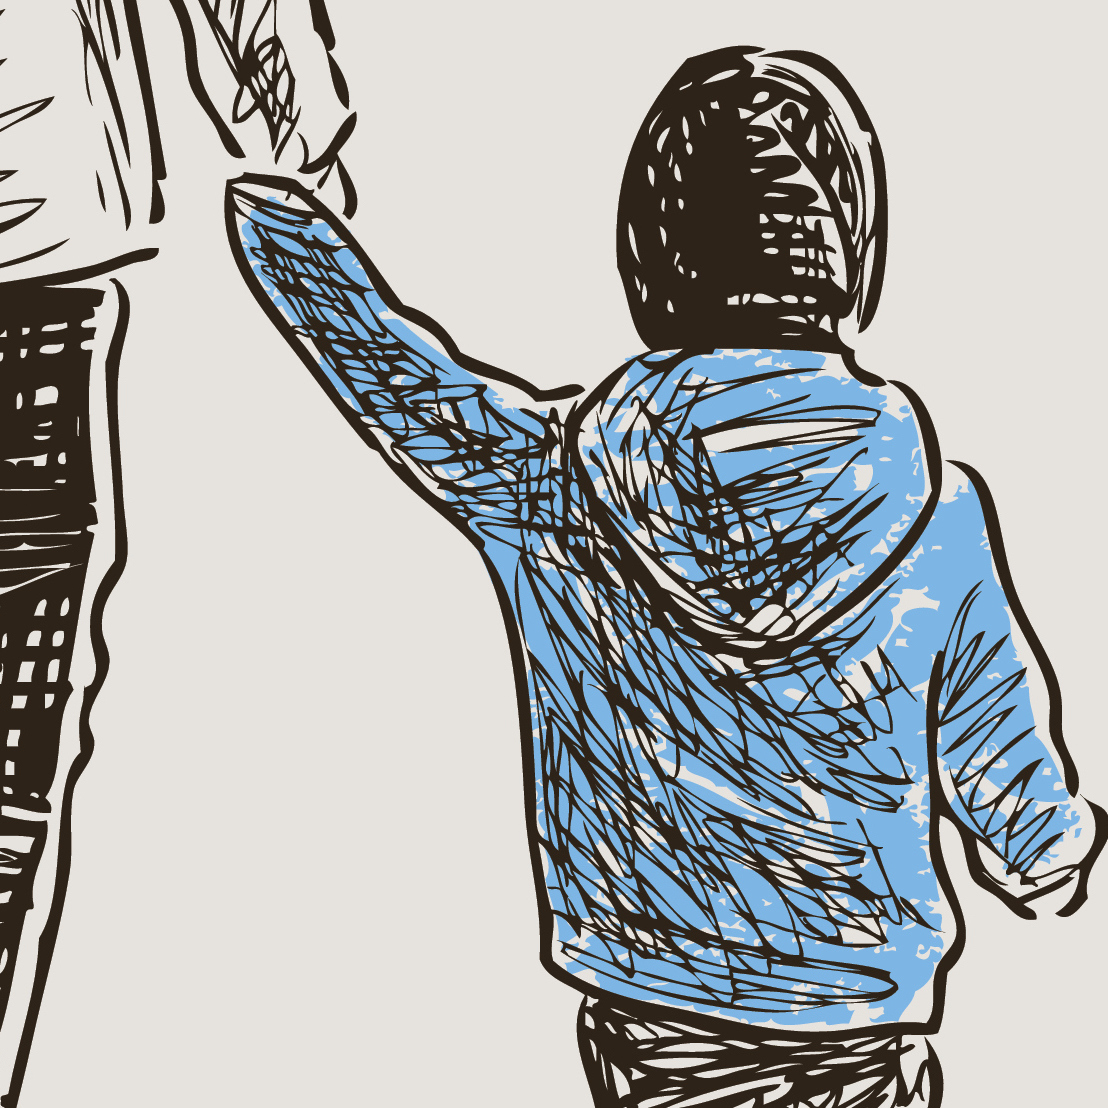 Illustration of parent holding child's hand as they walk together